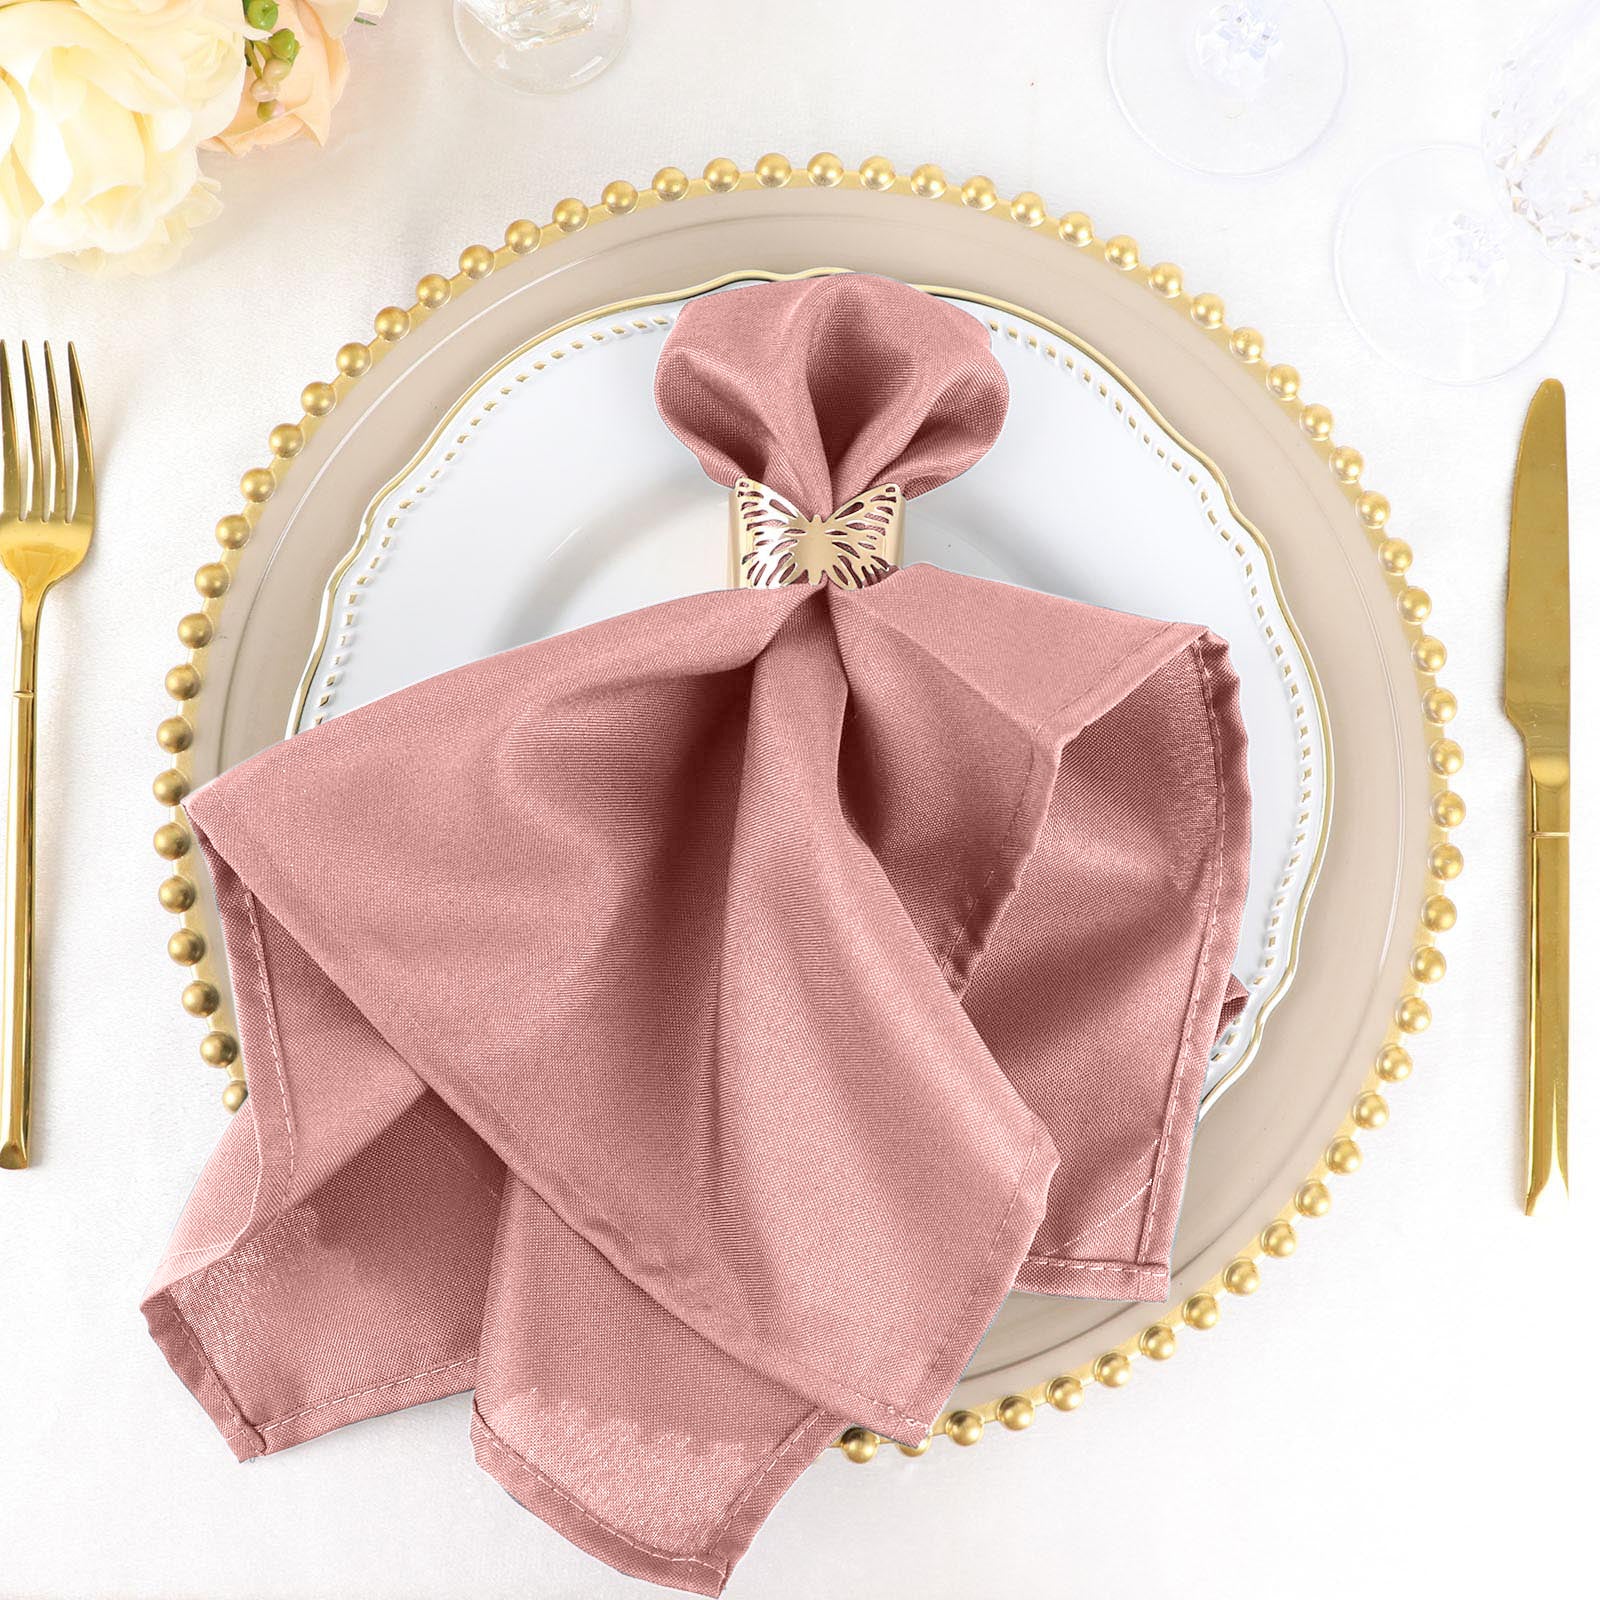 Efavormart Pack of 5 Premium 17 inch x 17 inch Washable Polyester Napkins Great for Wedding Party Restaurant Dinner Parties, Pink